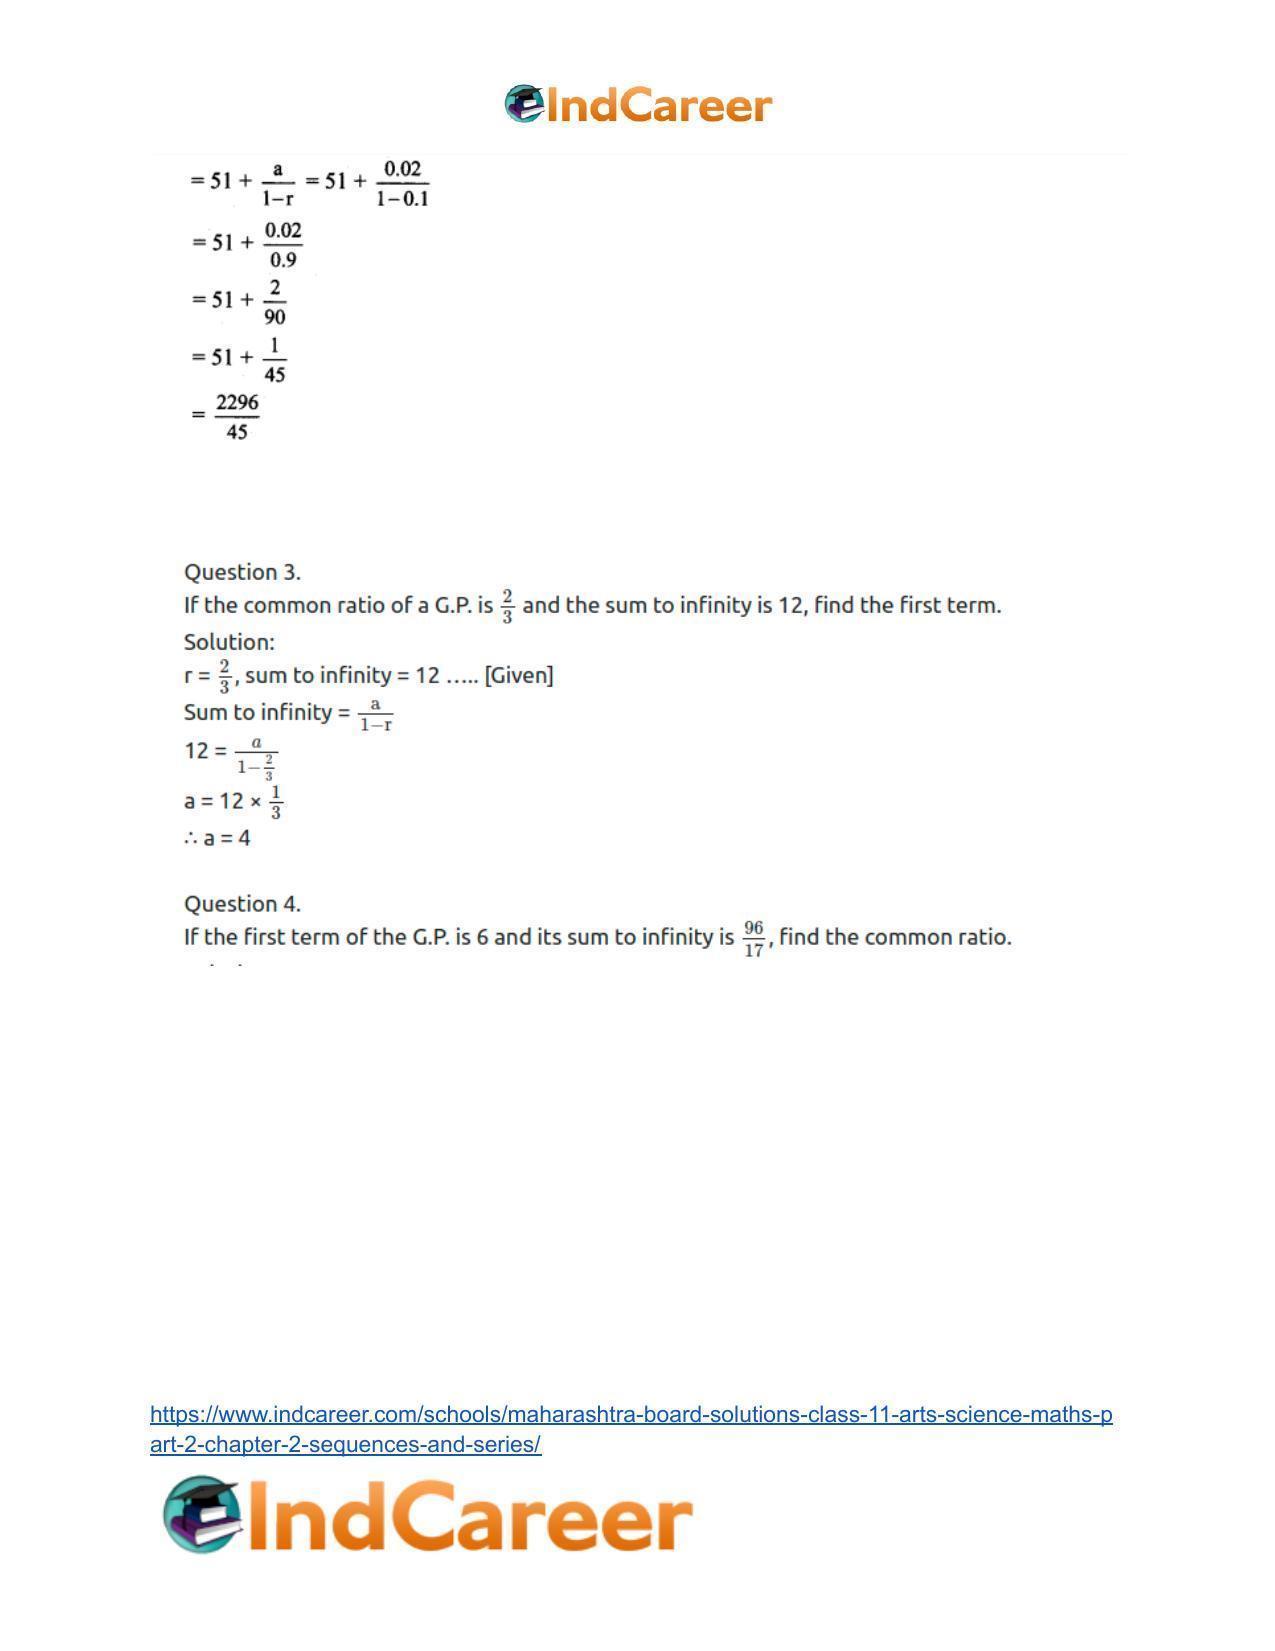 Maharashtra Board Solutions Class 11-Arts & Science Maths (Part 2): Chapter 2- Sequences and Series - Page 43